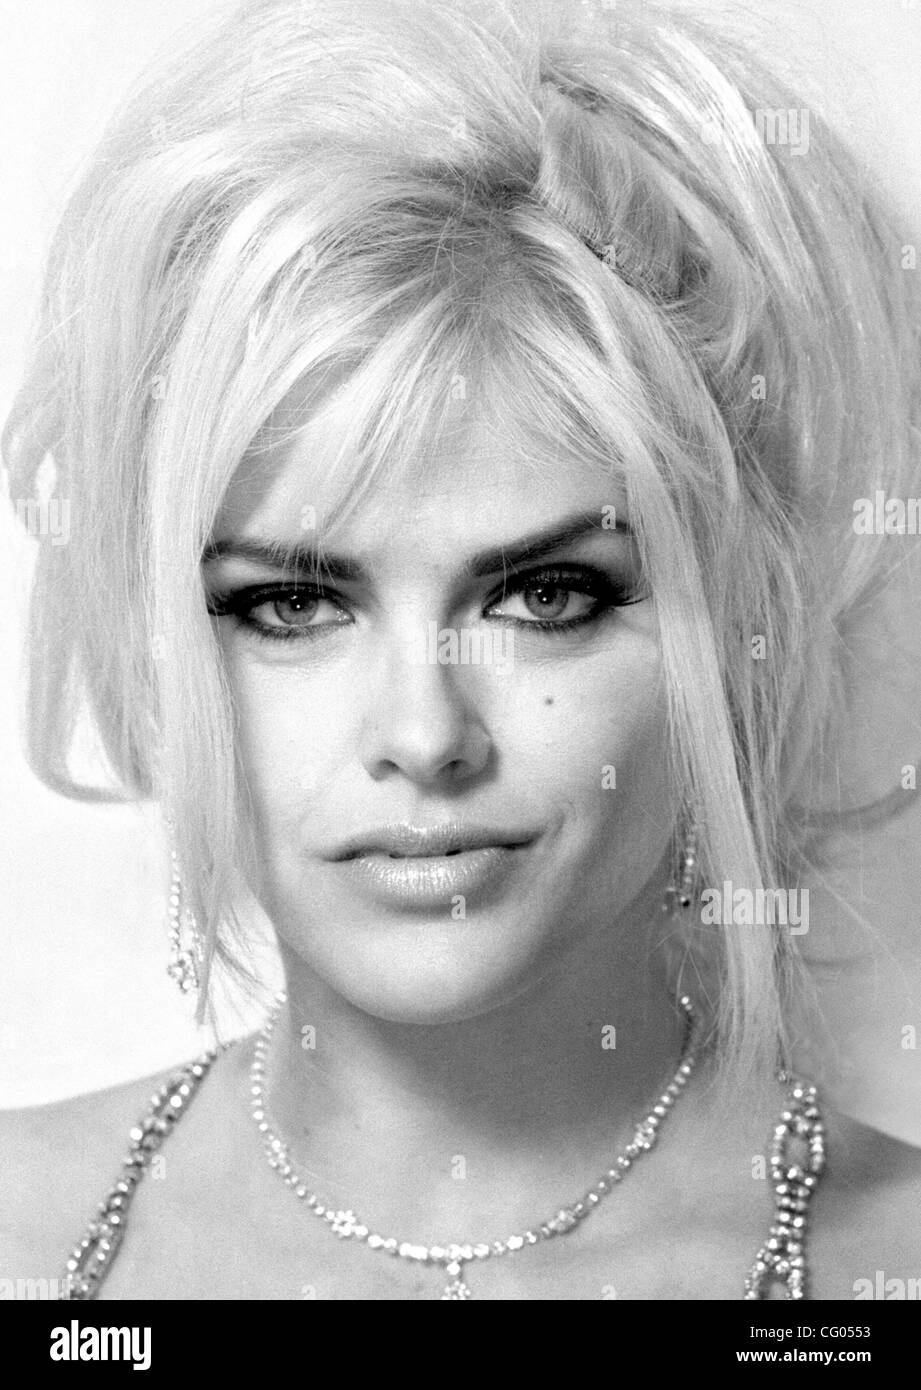 Jun 11, 2007 - Hollywood, Florida, USA - ANNA NICOLE SMITH, the voluptuous blonde whose life played out as an extraordinary tabloid tale - jeans model, Playboy centerfold, widow of an octogenarian oil tycoon, tragic mother - has died after collapsing at a hotel, aged  39.  Smith was born Vickie Lynn Stock Photo